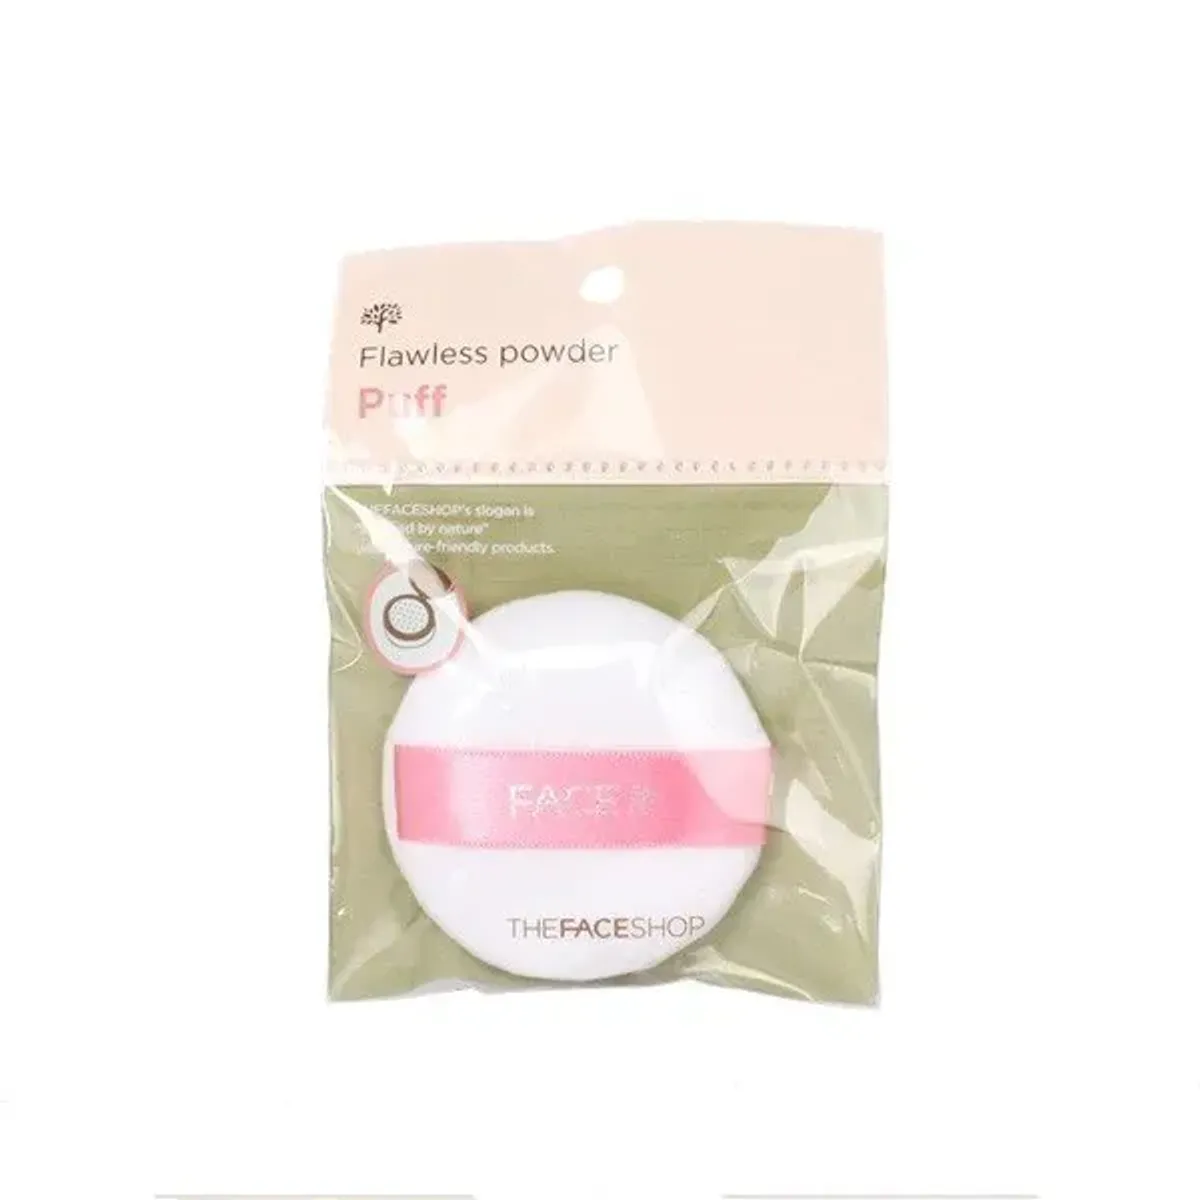 daily-beauty-tools-face-it-flawless-powder-puff-1-2